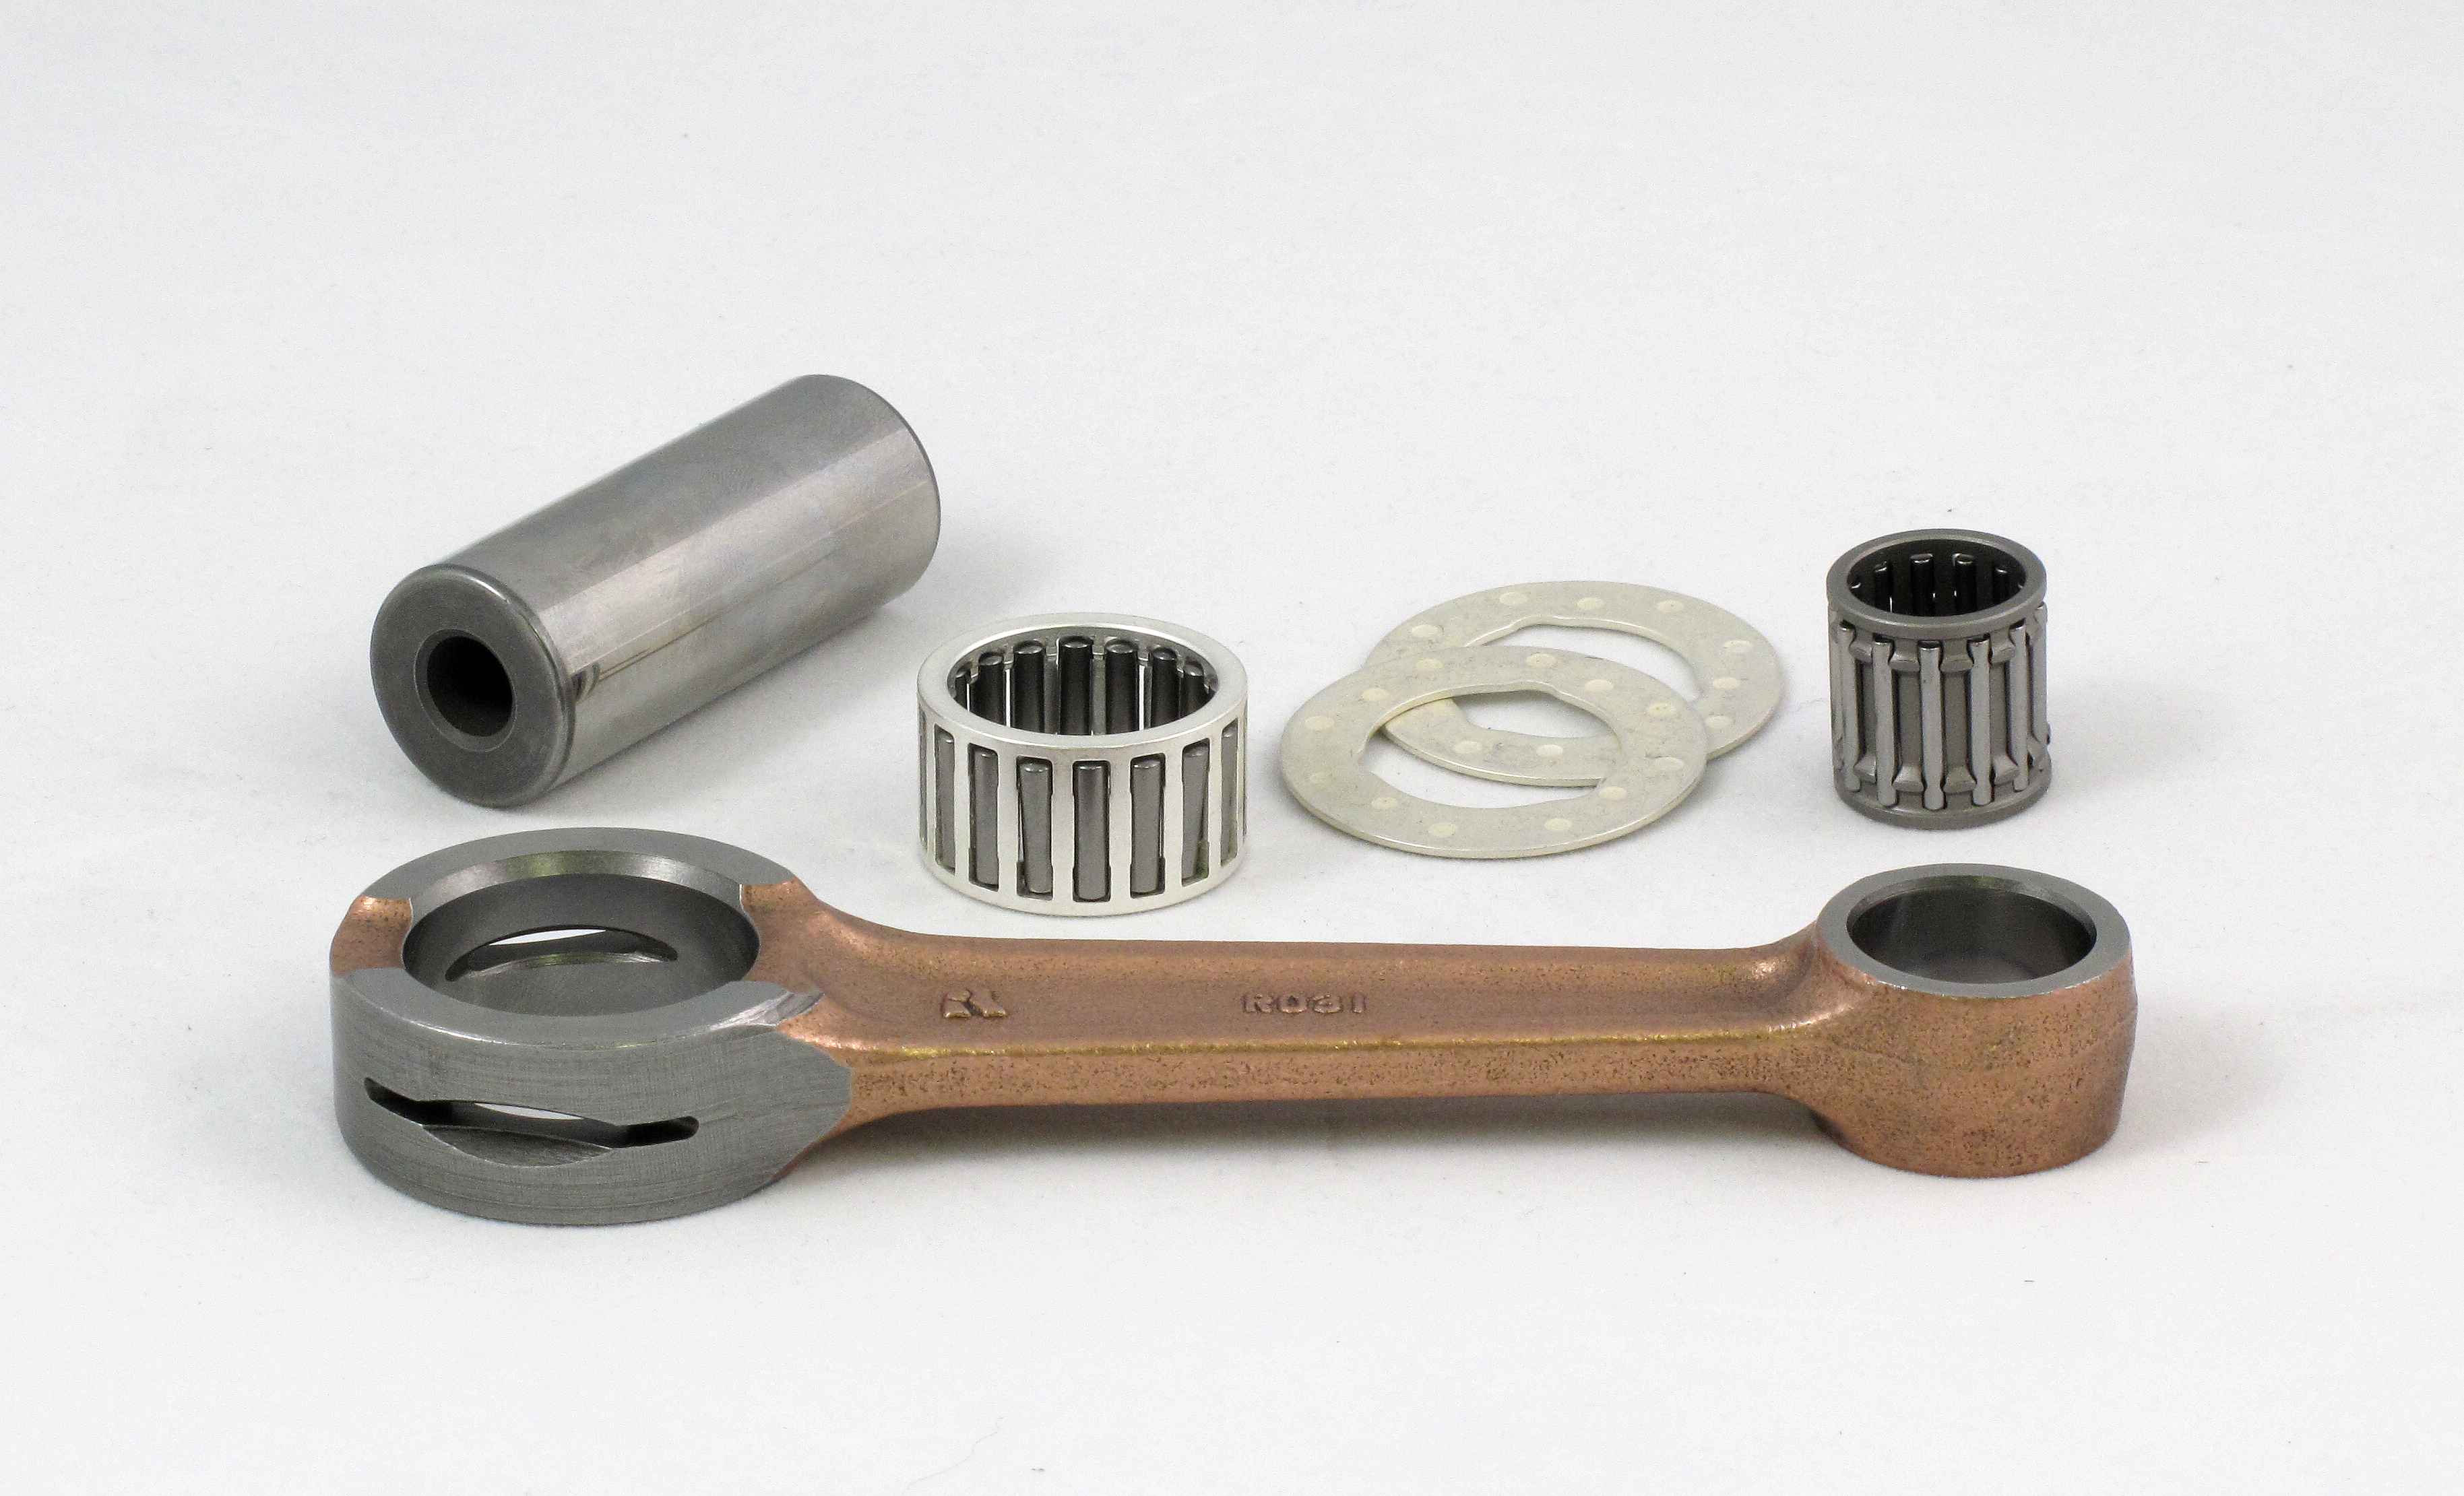 MAICO 250 (83-on) CONNECTING ROD KIT